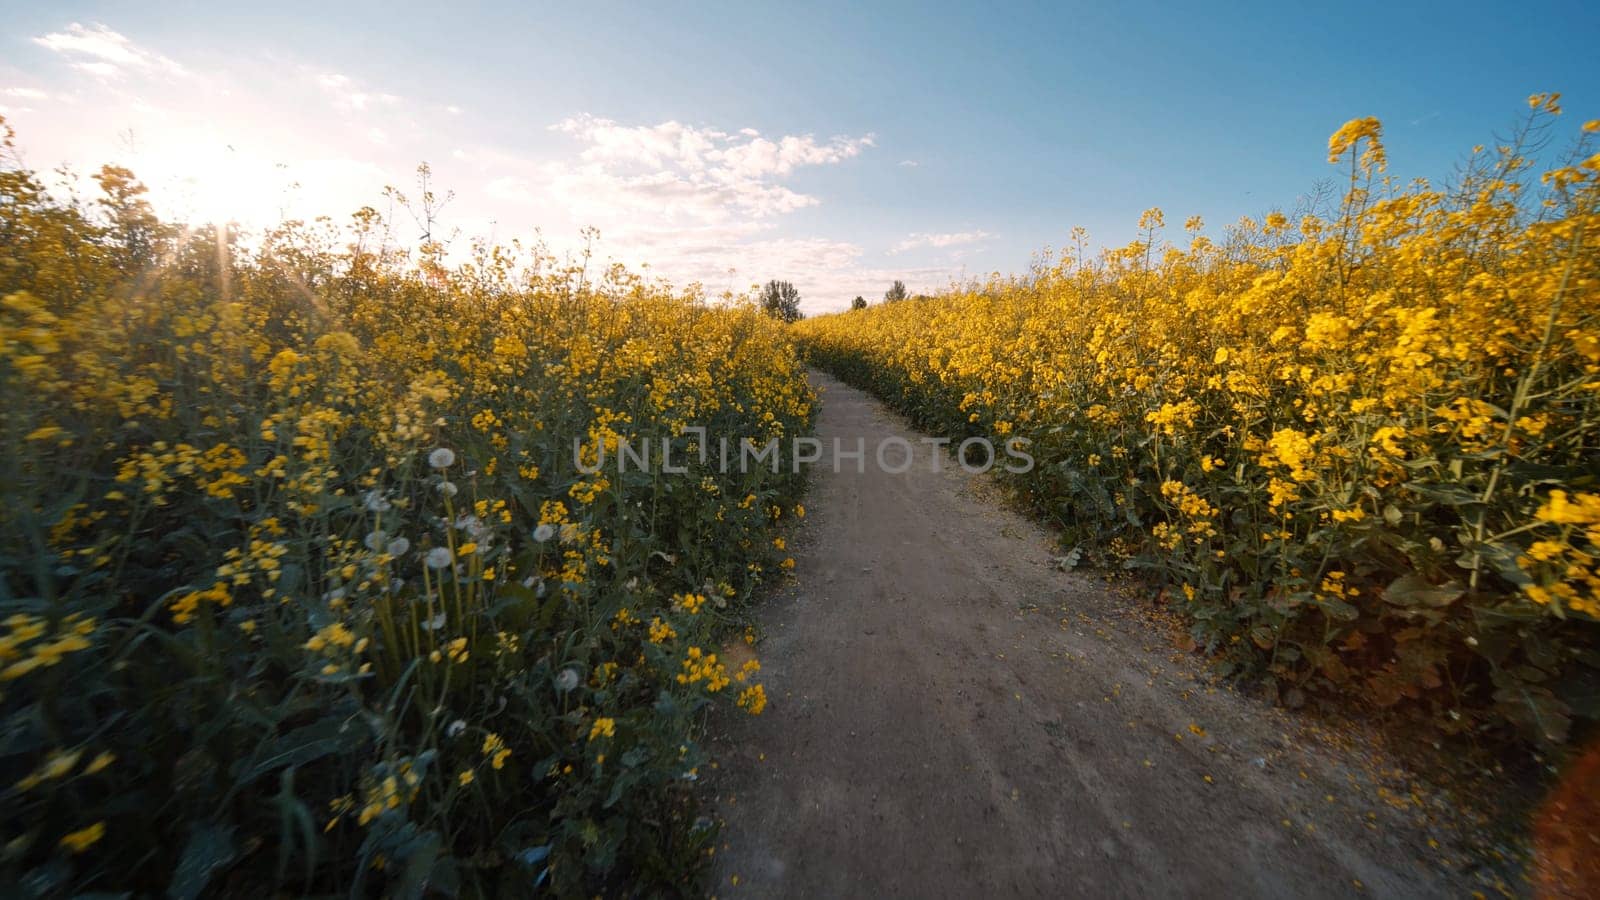 Rapeseed flowers at sunset. Video using a slider. by DovidPro